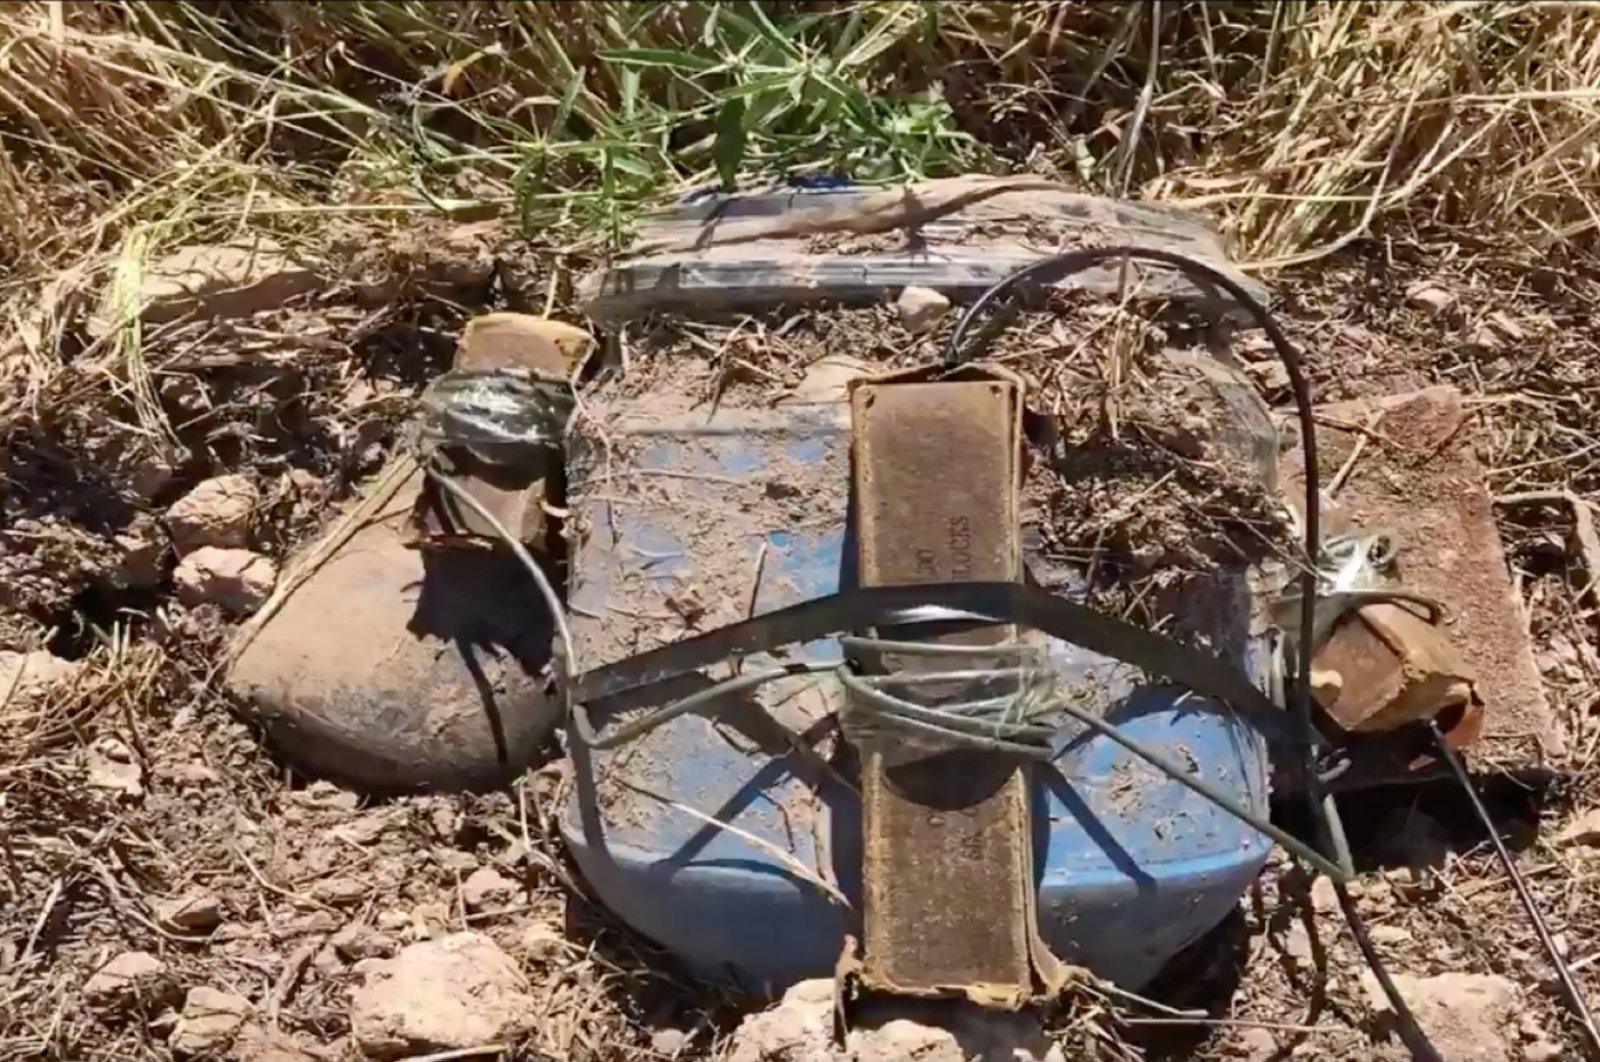 Explosives planted by the YPG/PKK terror group were seized in an area falling inside the region delineated as part of Turkey's Operation Peace Spring in northern Syria, May 11, 2020. (AA Photo)
